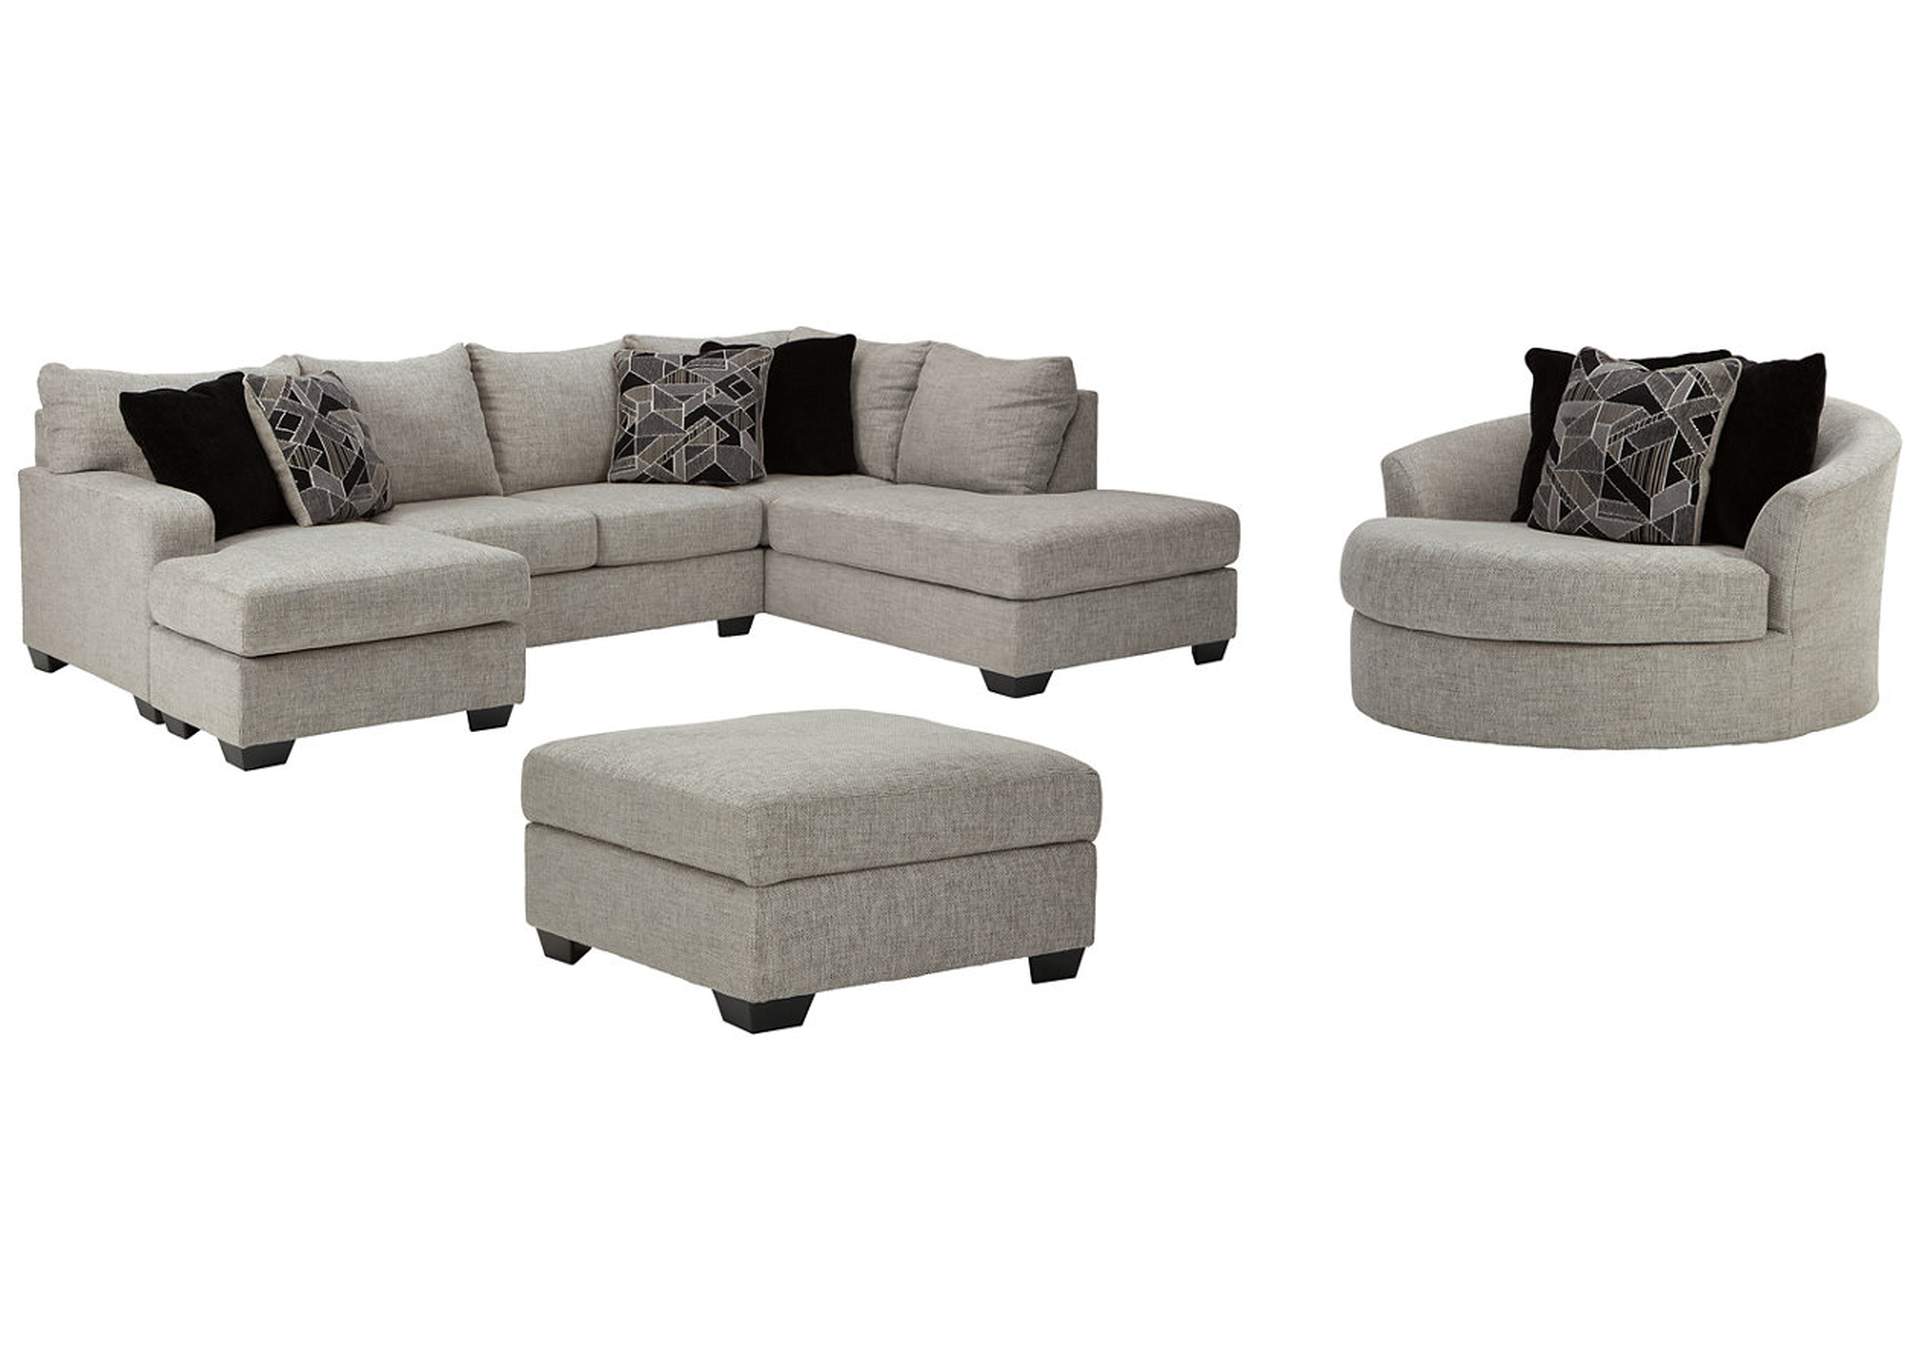 Megginson 2-Piece Sectional with Chair and Ottoman,Benchcraft